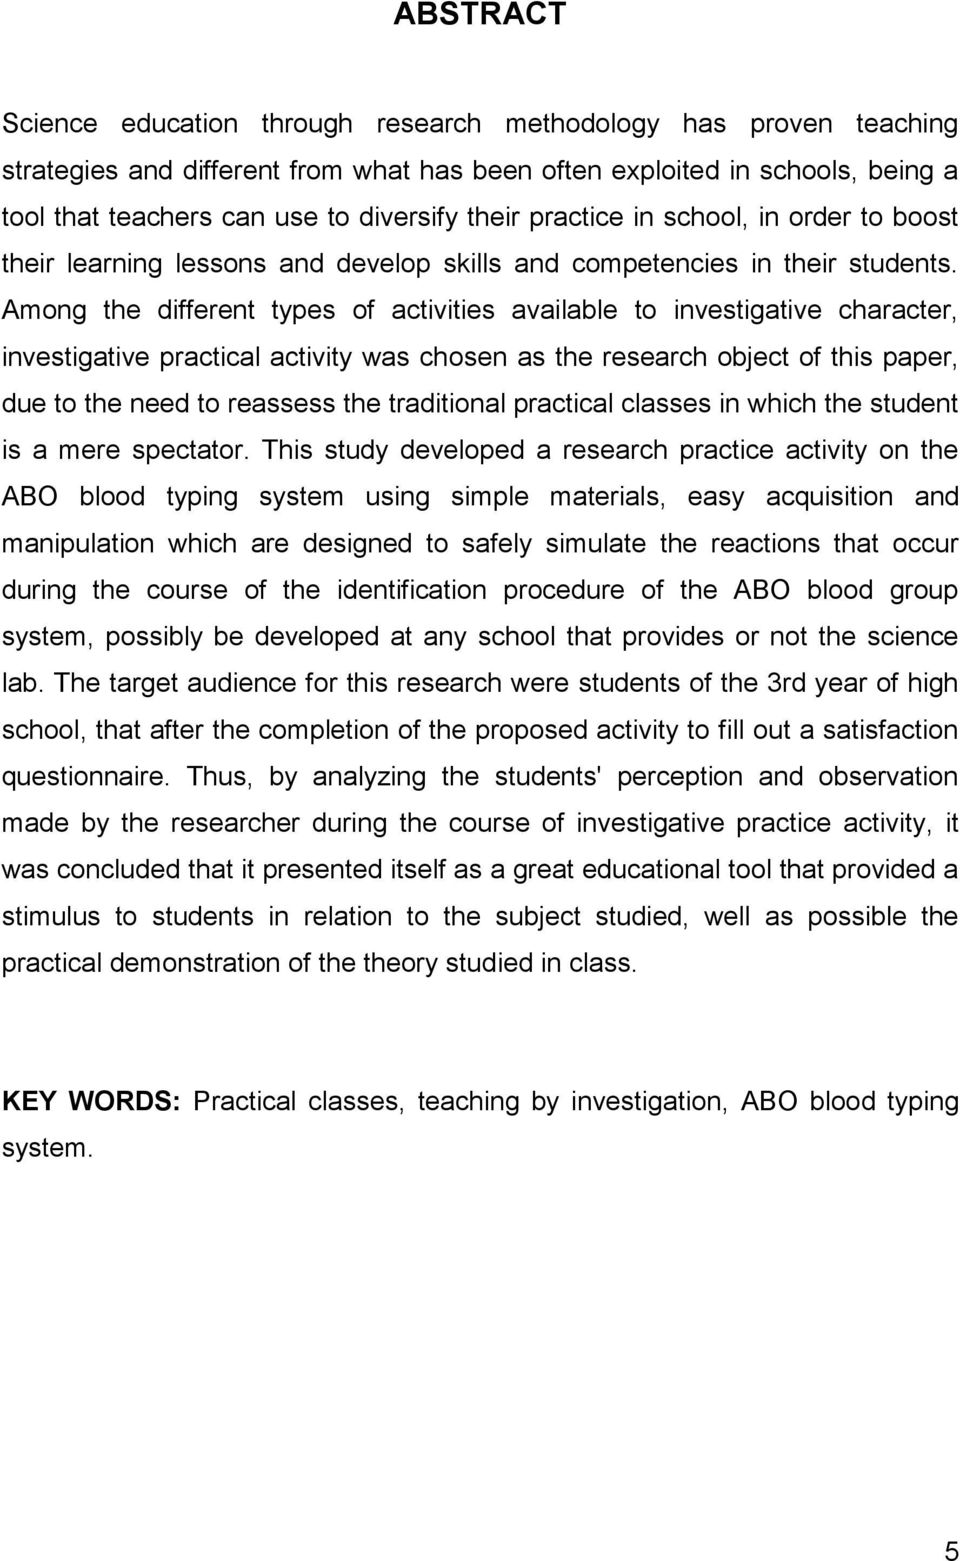 Among the different types of activities available to investigative character, investigative practical activity was chosen as the research object of this paper, due to the need to reassess the